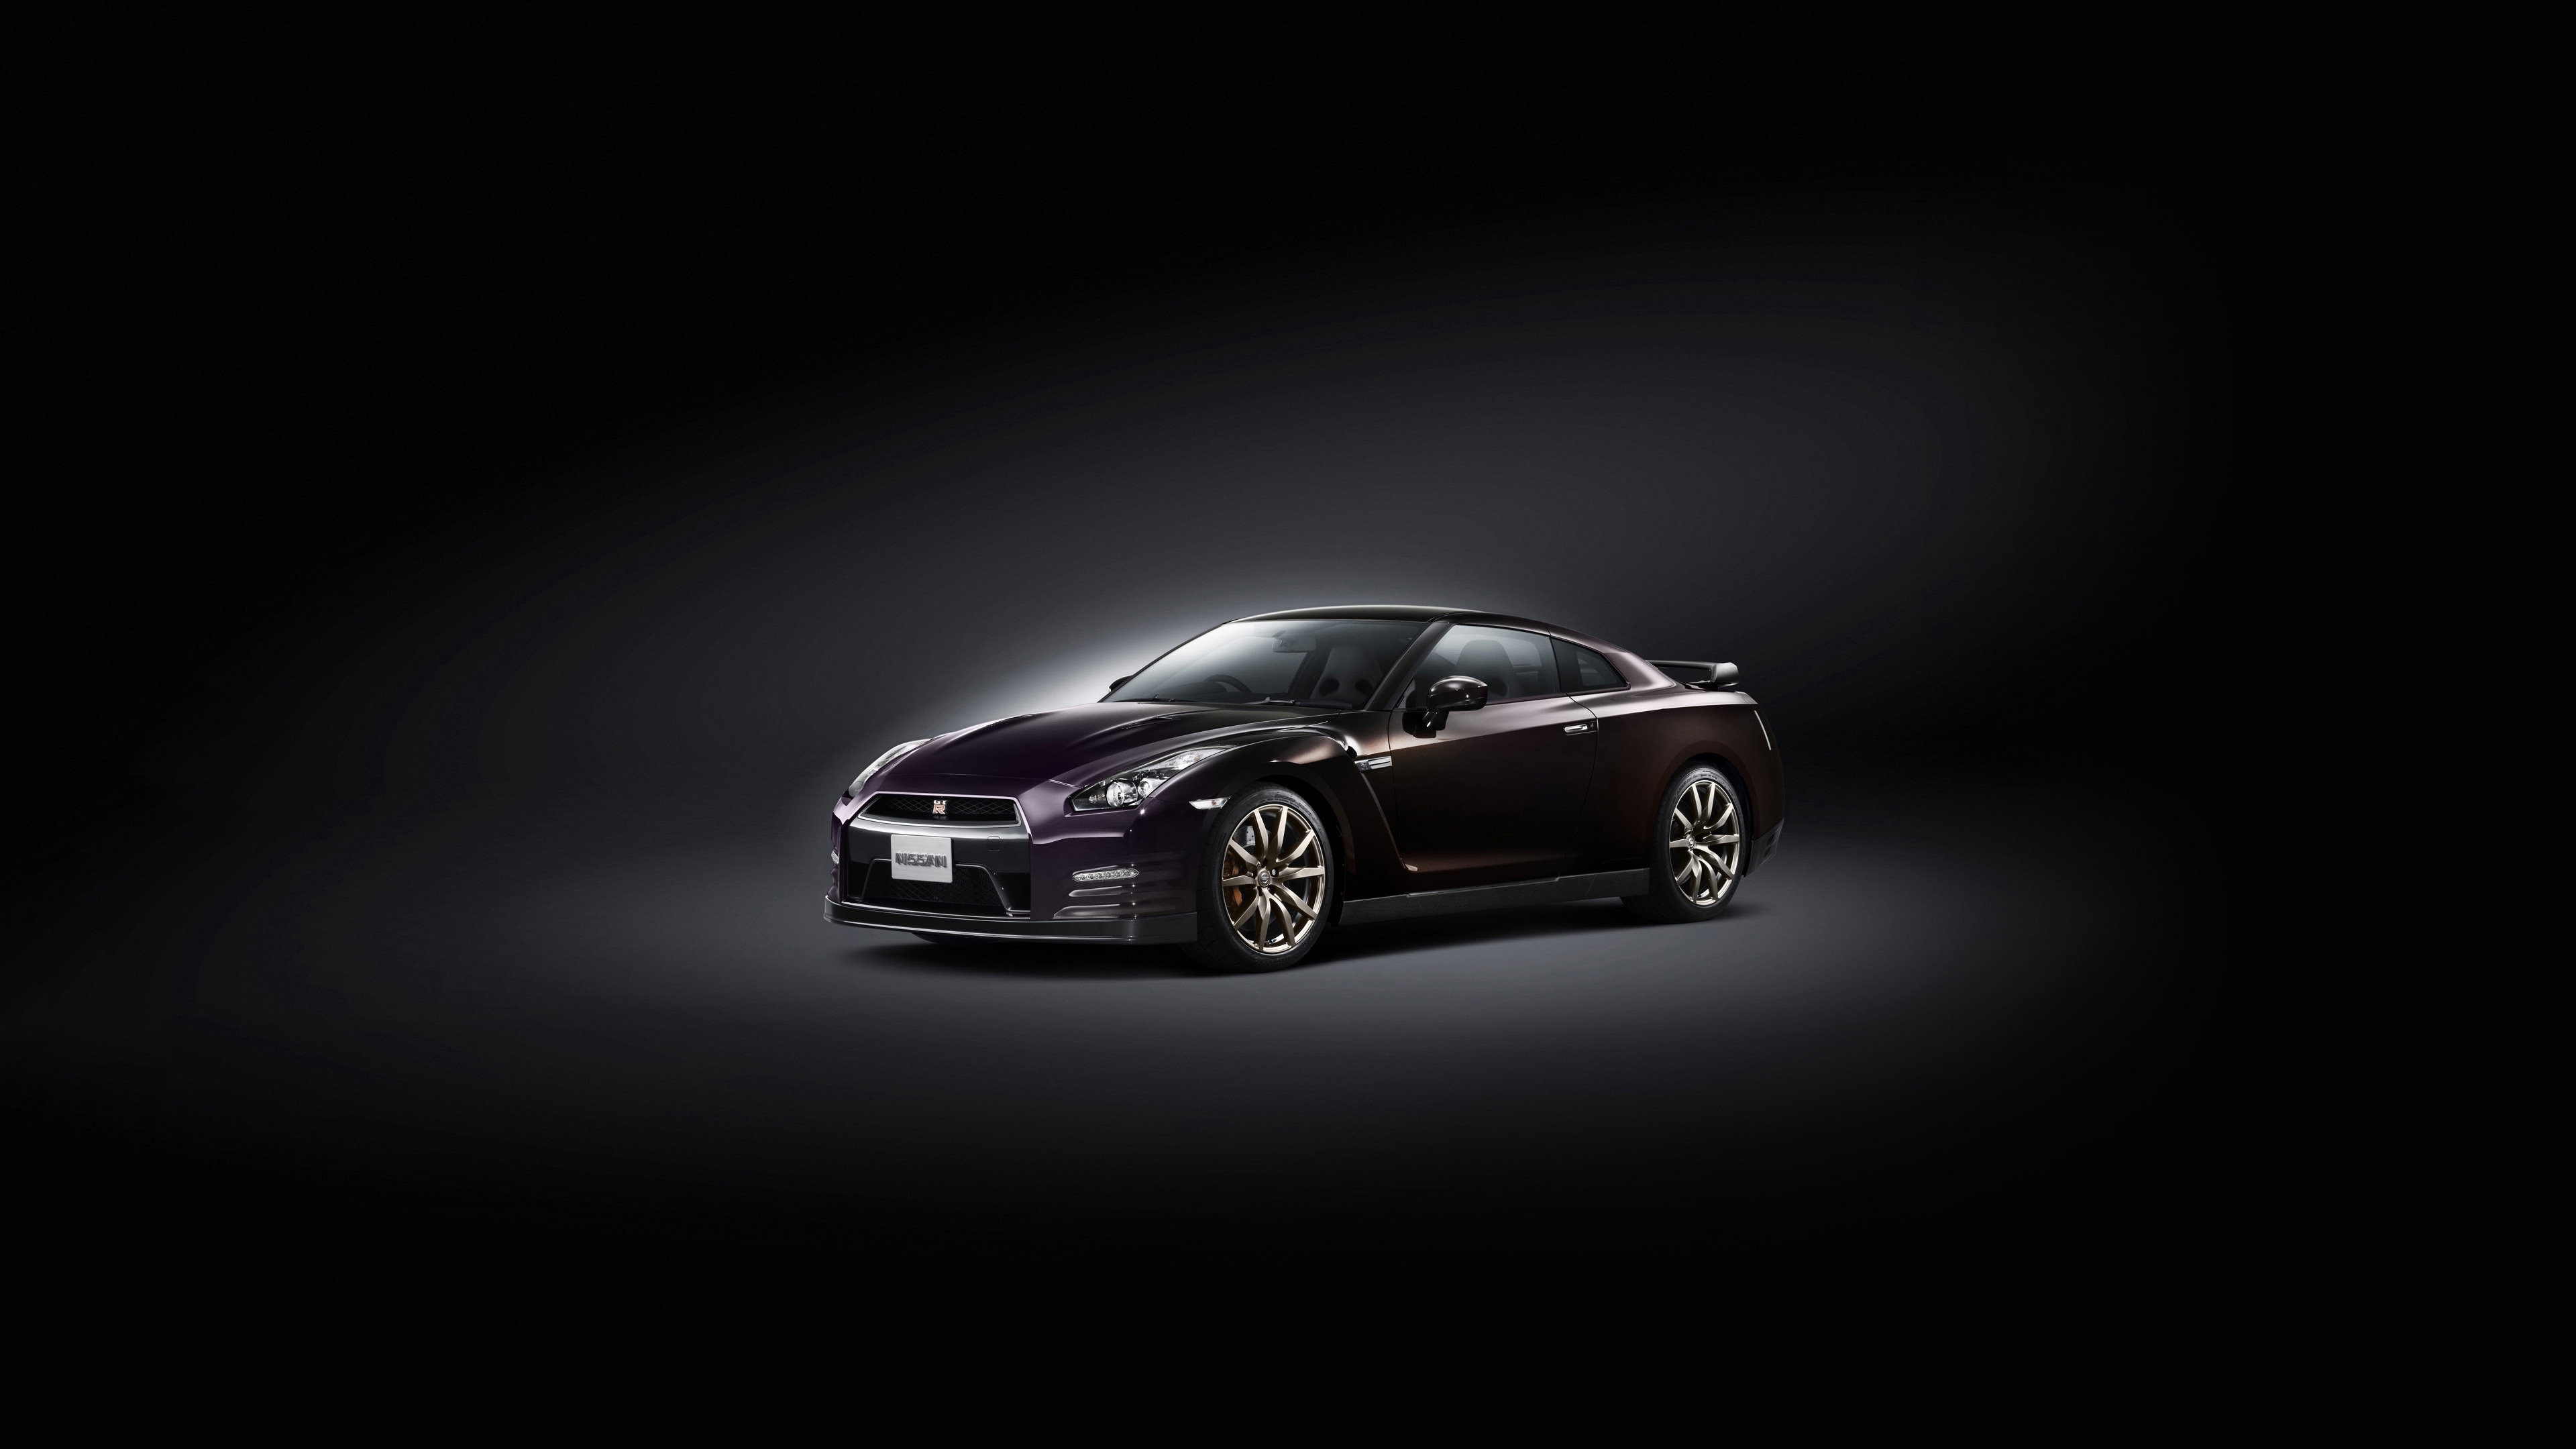 Nissan GT-R Special Edition 2014 for 3840 x 2160 Ultra HD resolution